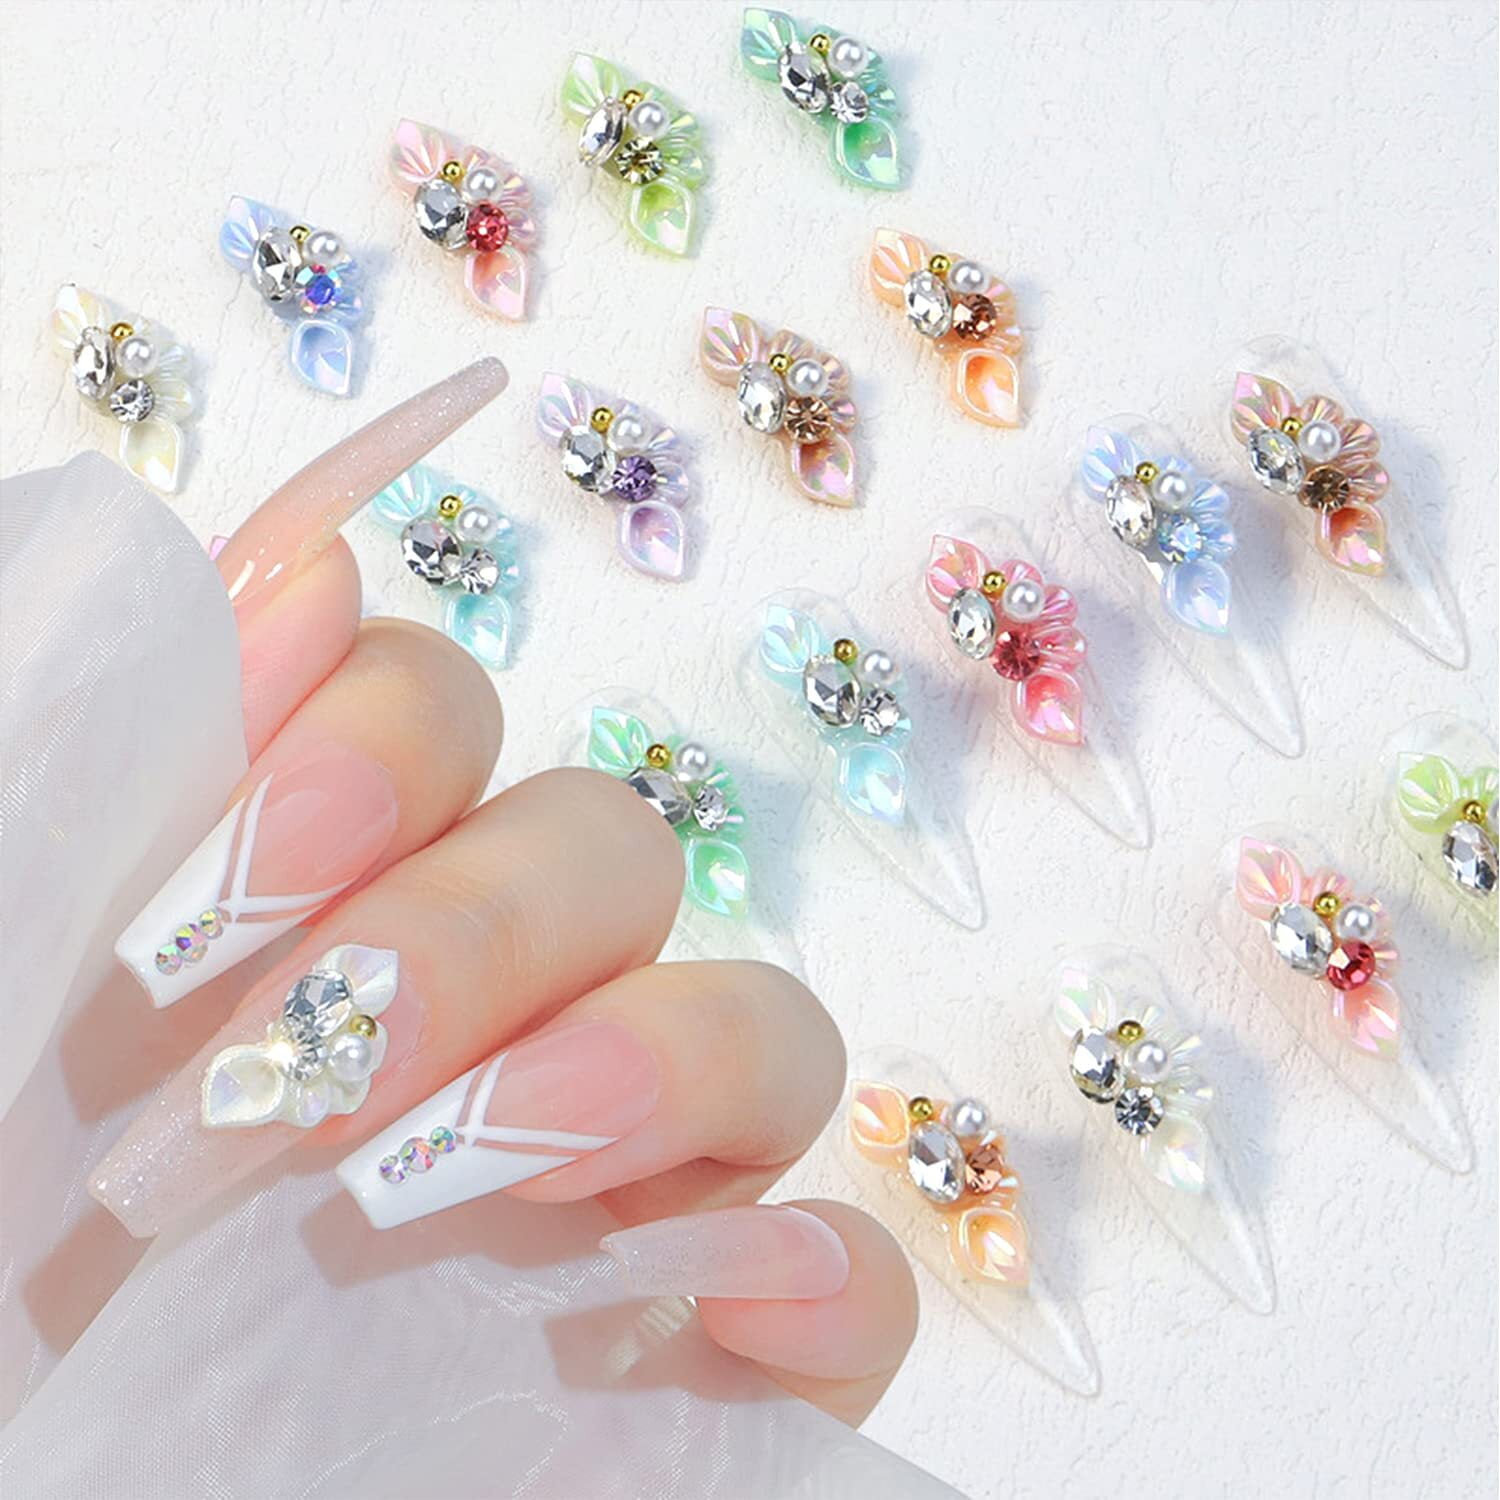 Luxury Crystal Nail Charms With Rhinestones And Diamonds Big Box For Nail  Decoration Set And Manicure Accessories 231117 From Huan07, $17.74